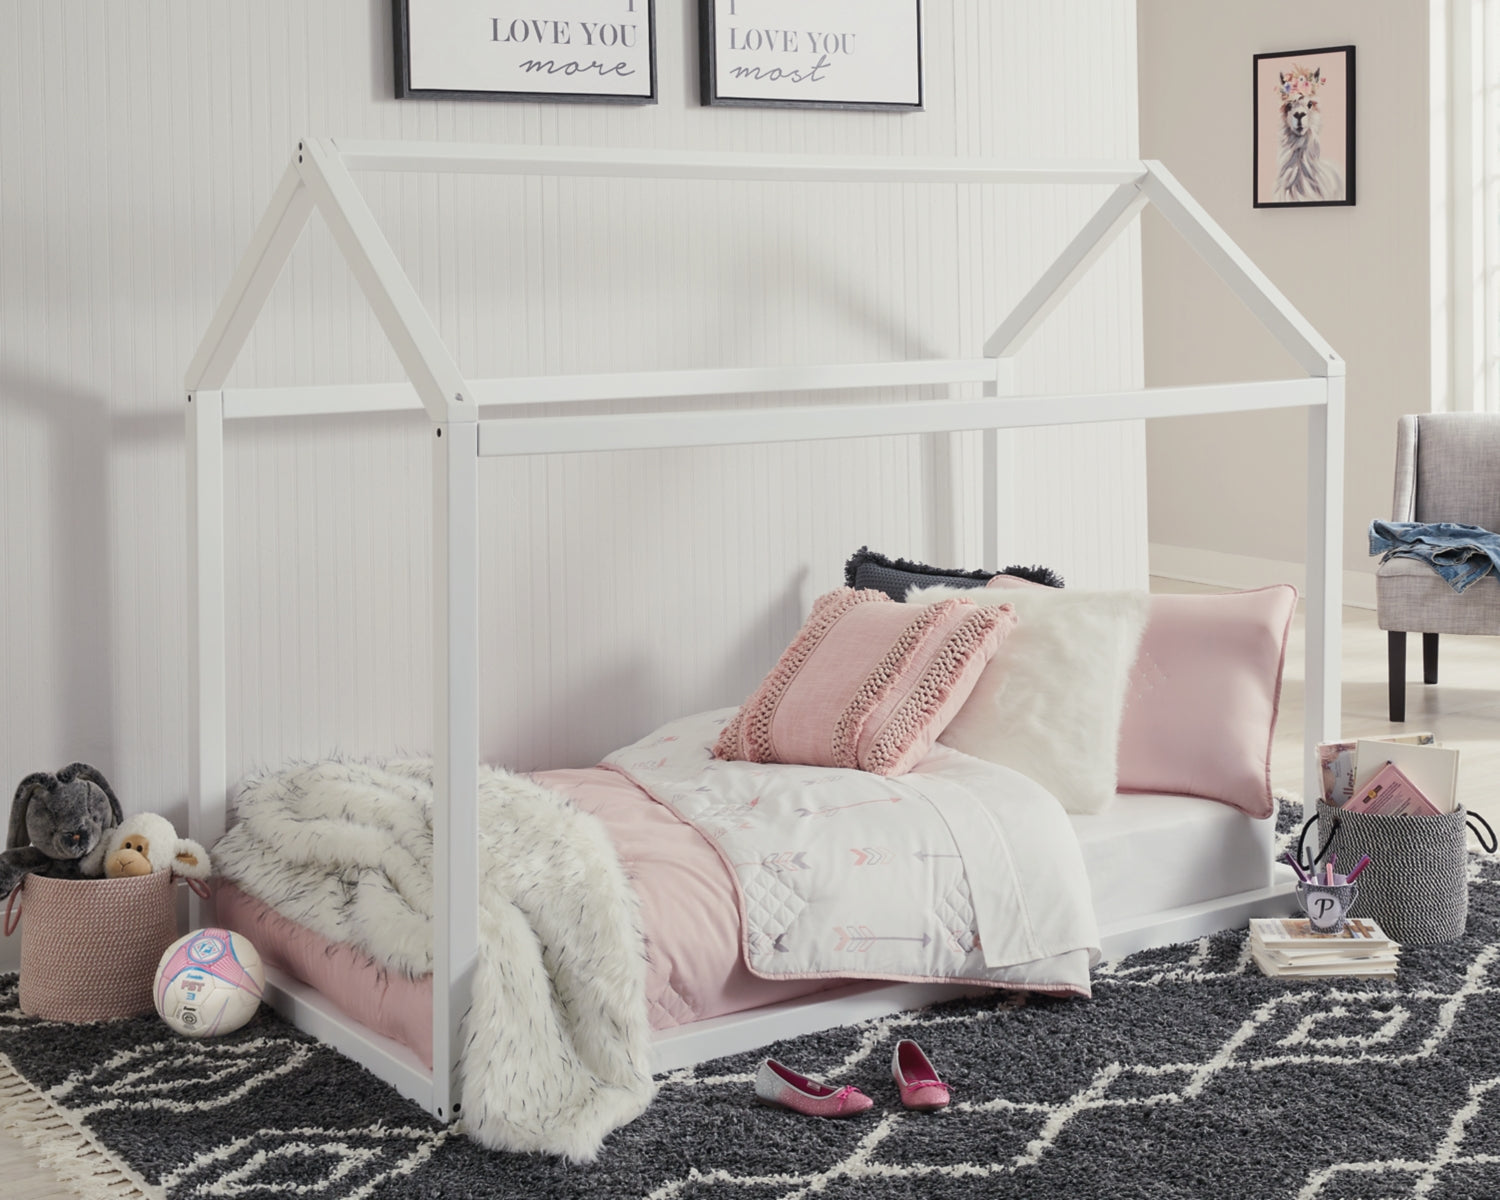 Flannibrook Twin House Bed Frame